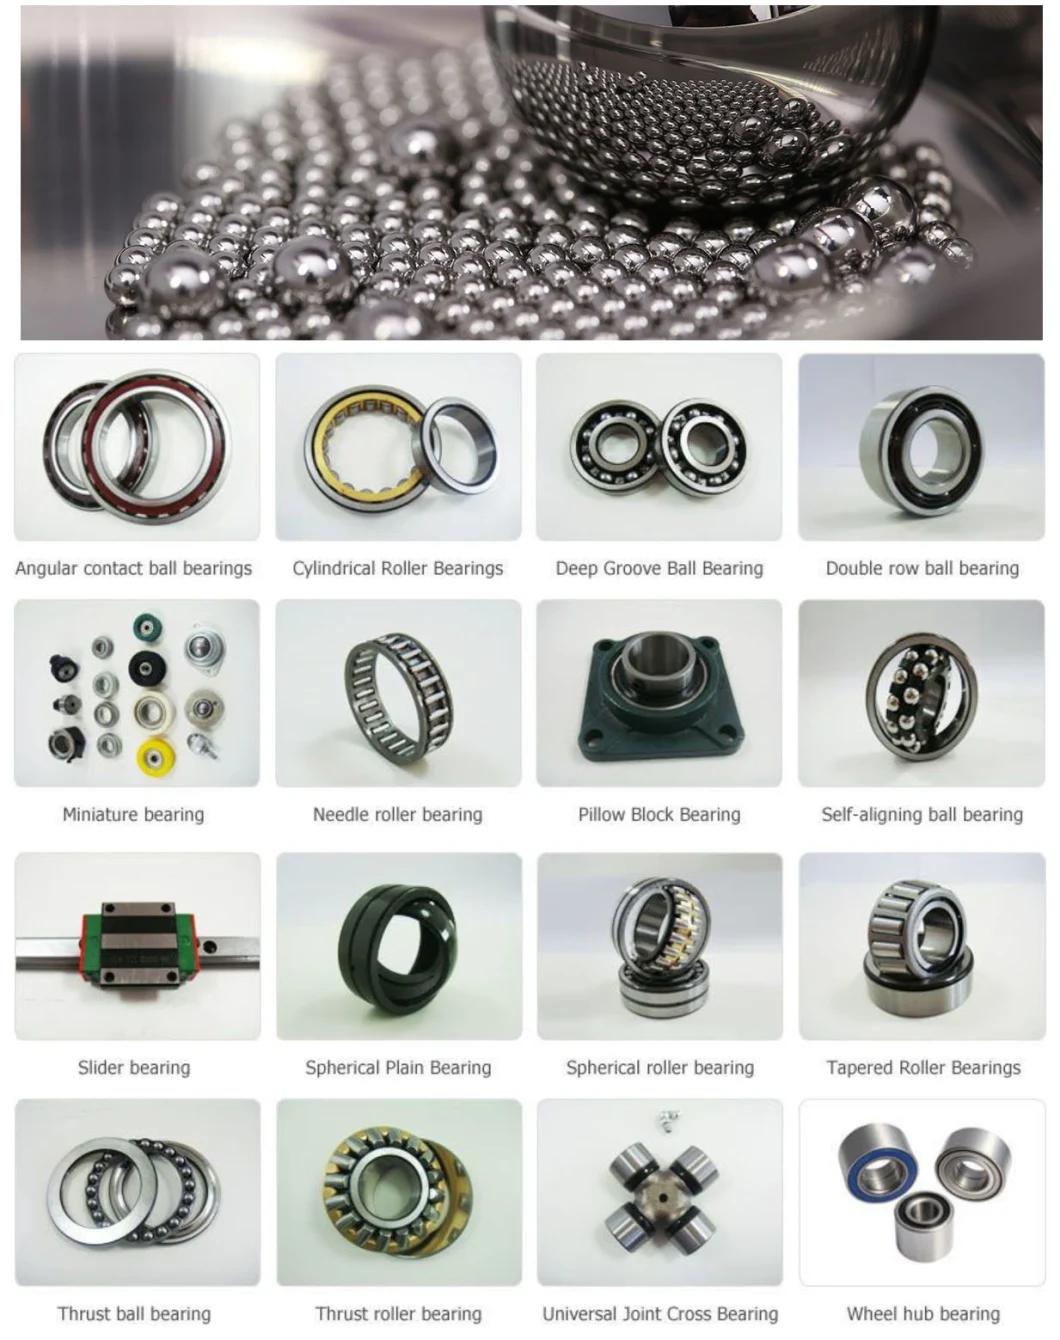 Factory Outlet Non-Separable Cylindrical Roller Bearing